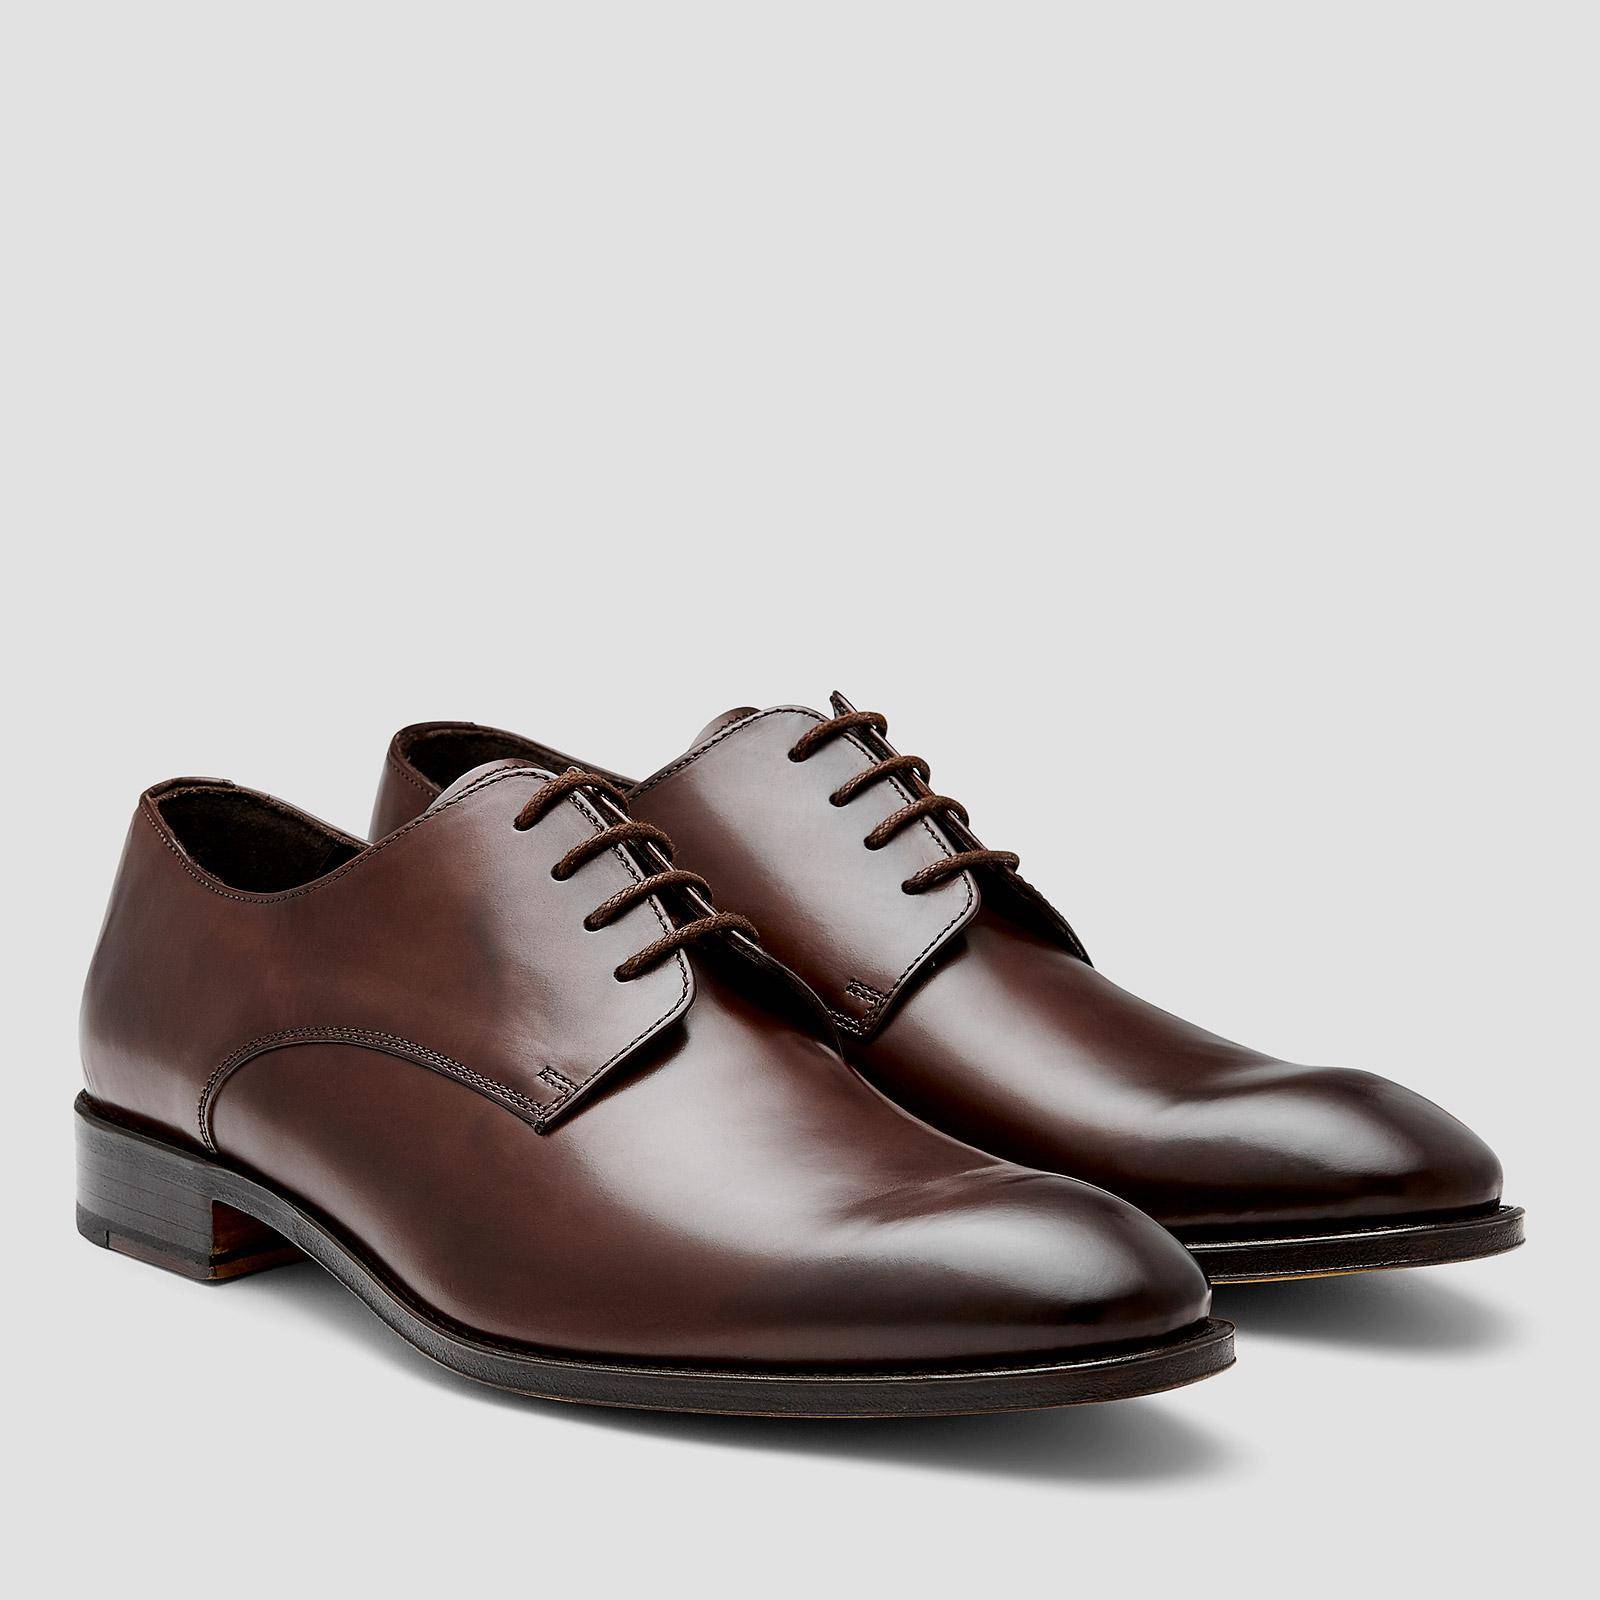 Five Shoes You Need For Work - Aquila